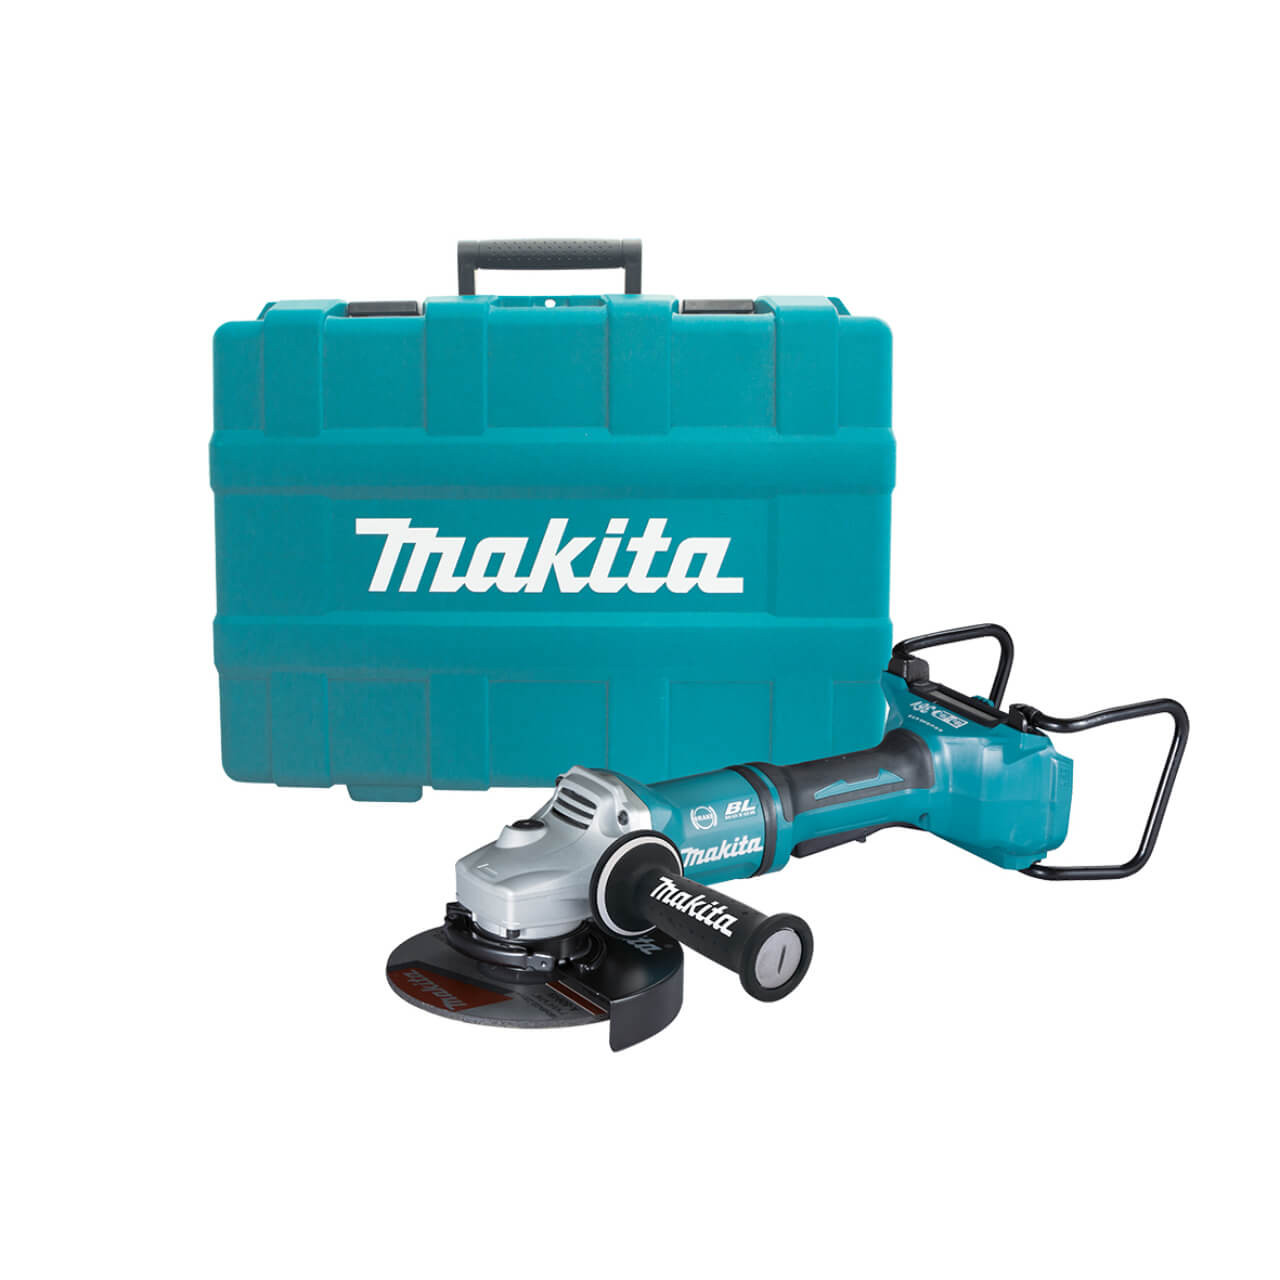 Makita 18Vx2 BRUSHLESS 180mm (7”) Angle Grinder. Paddle Switch. Kick Back Detection. Electric Brake. Anti-Vib Handle & Carry Case - Tool Only